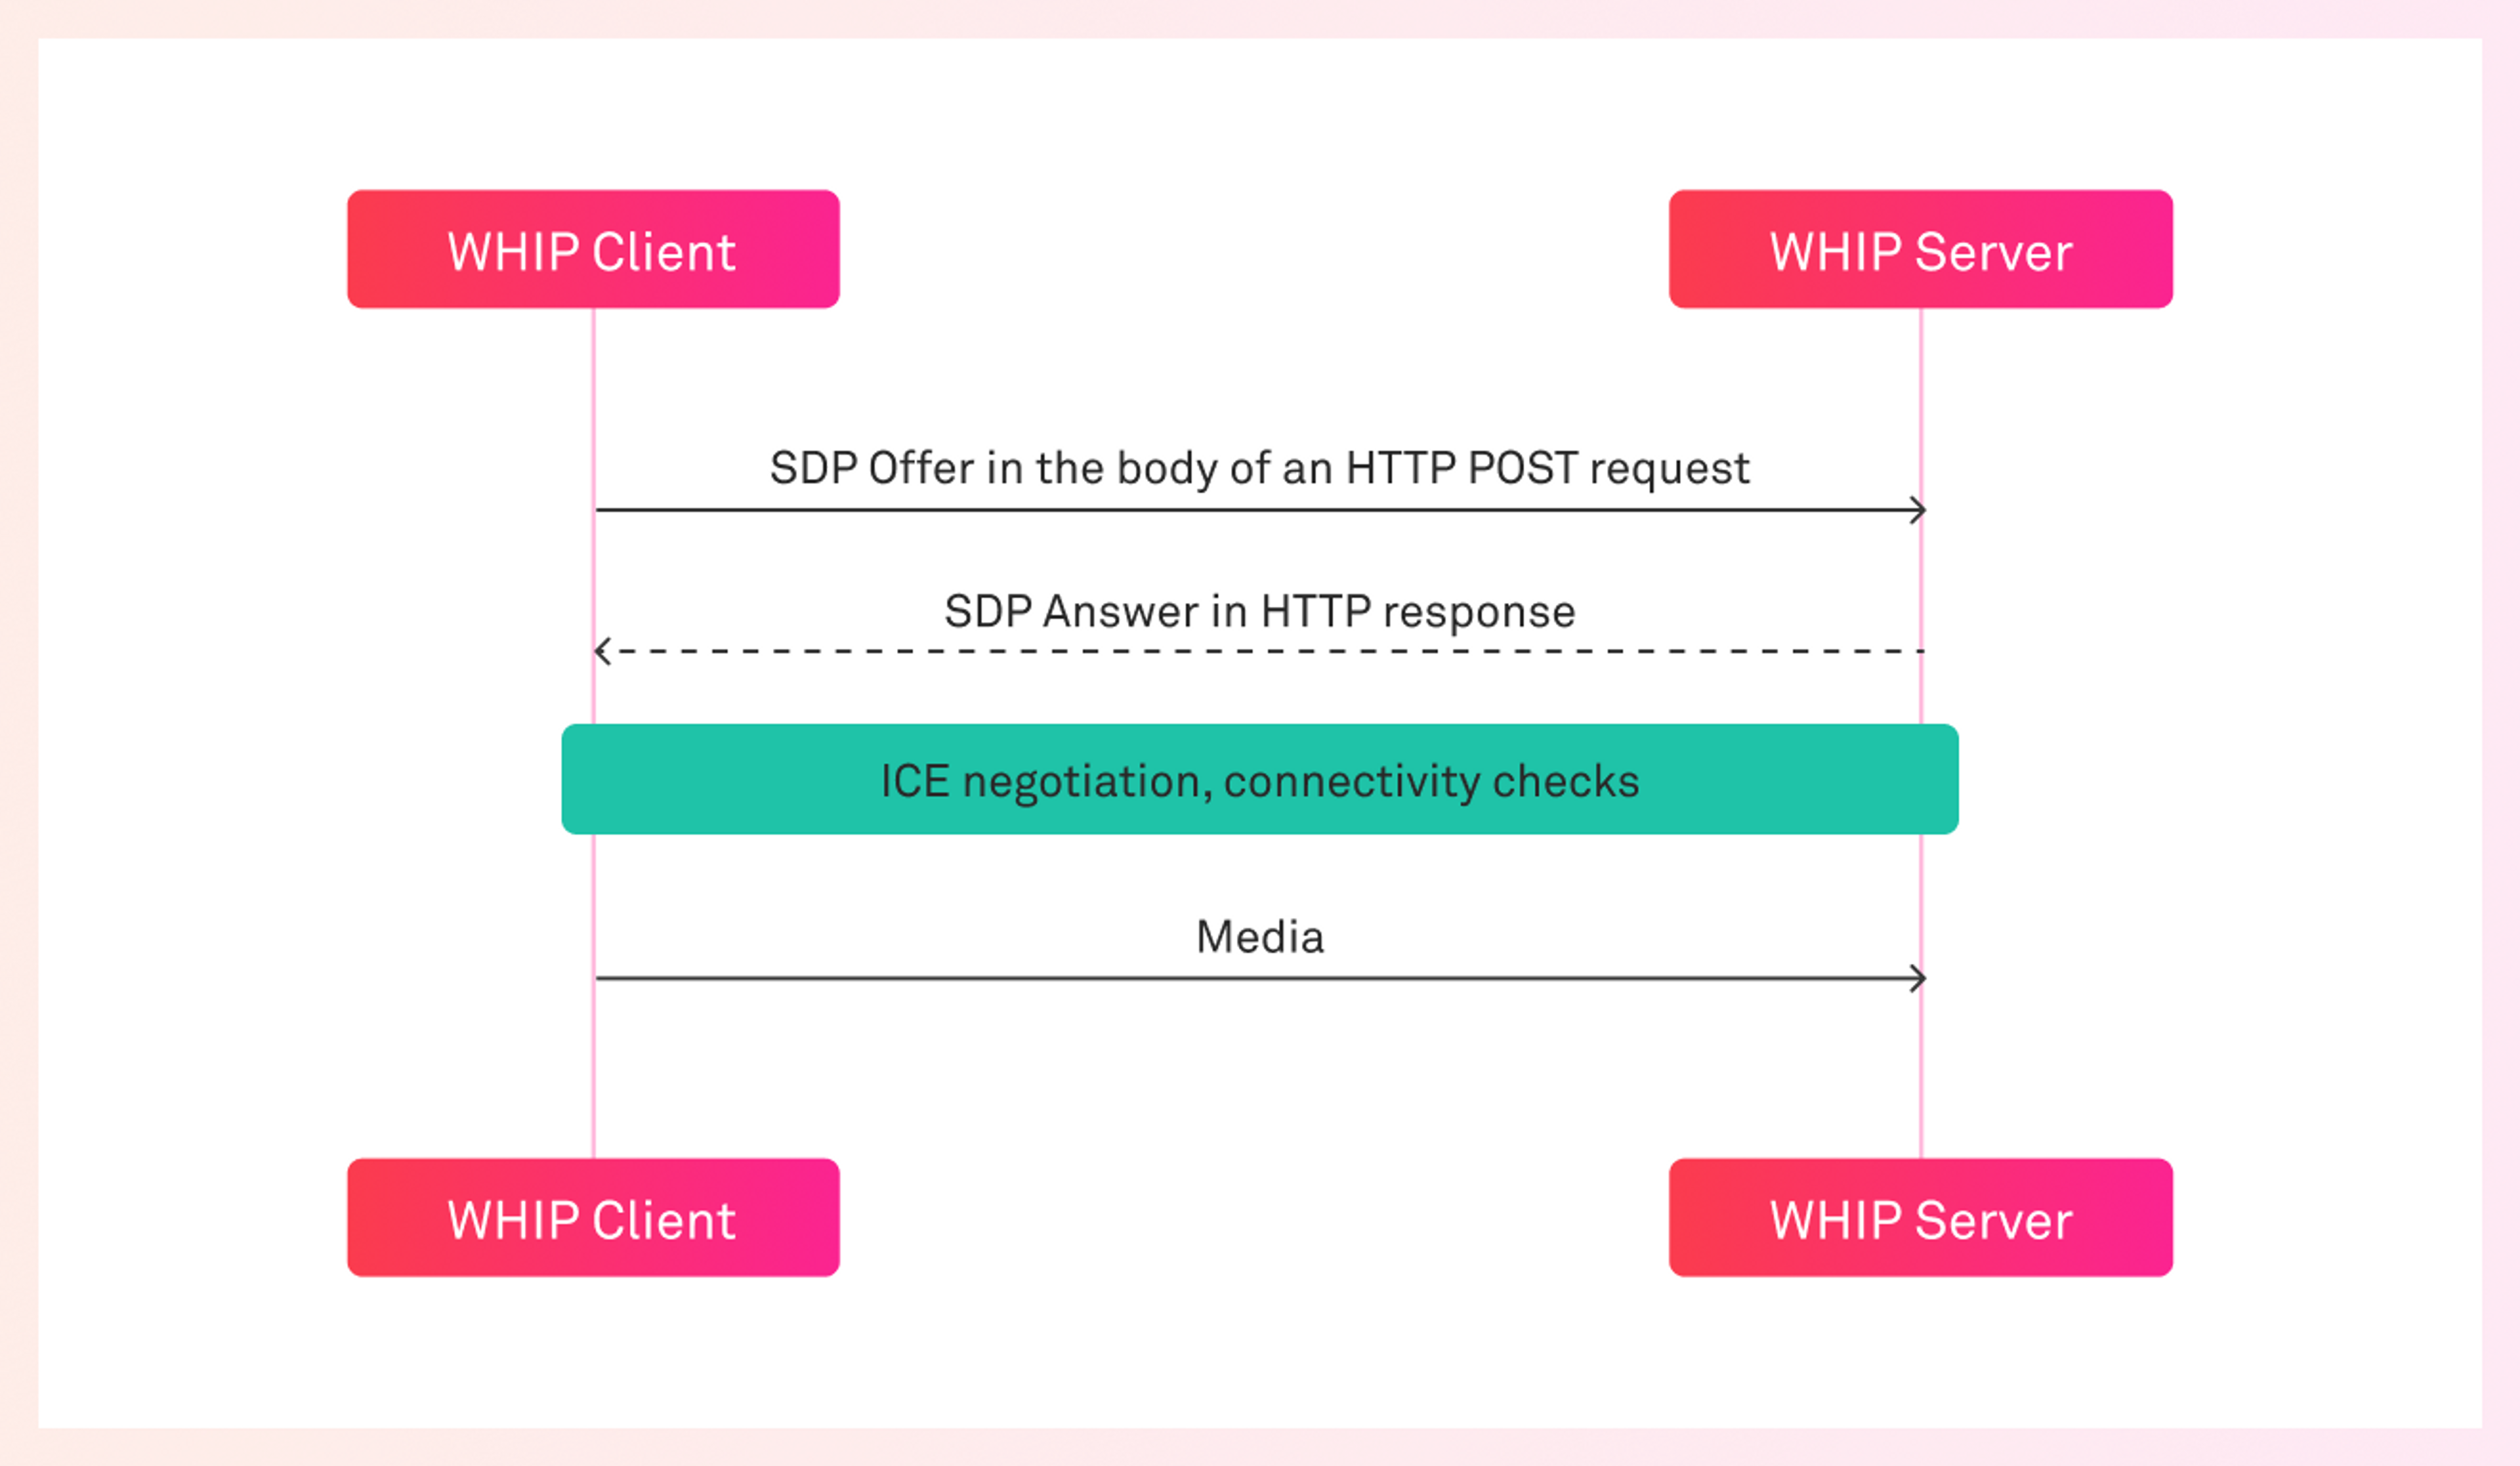 A sequence diagram showcasing the communication between a WHIP Client and WHIP server